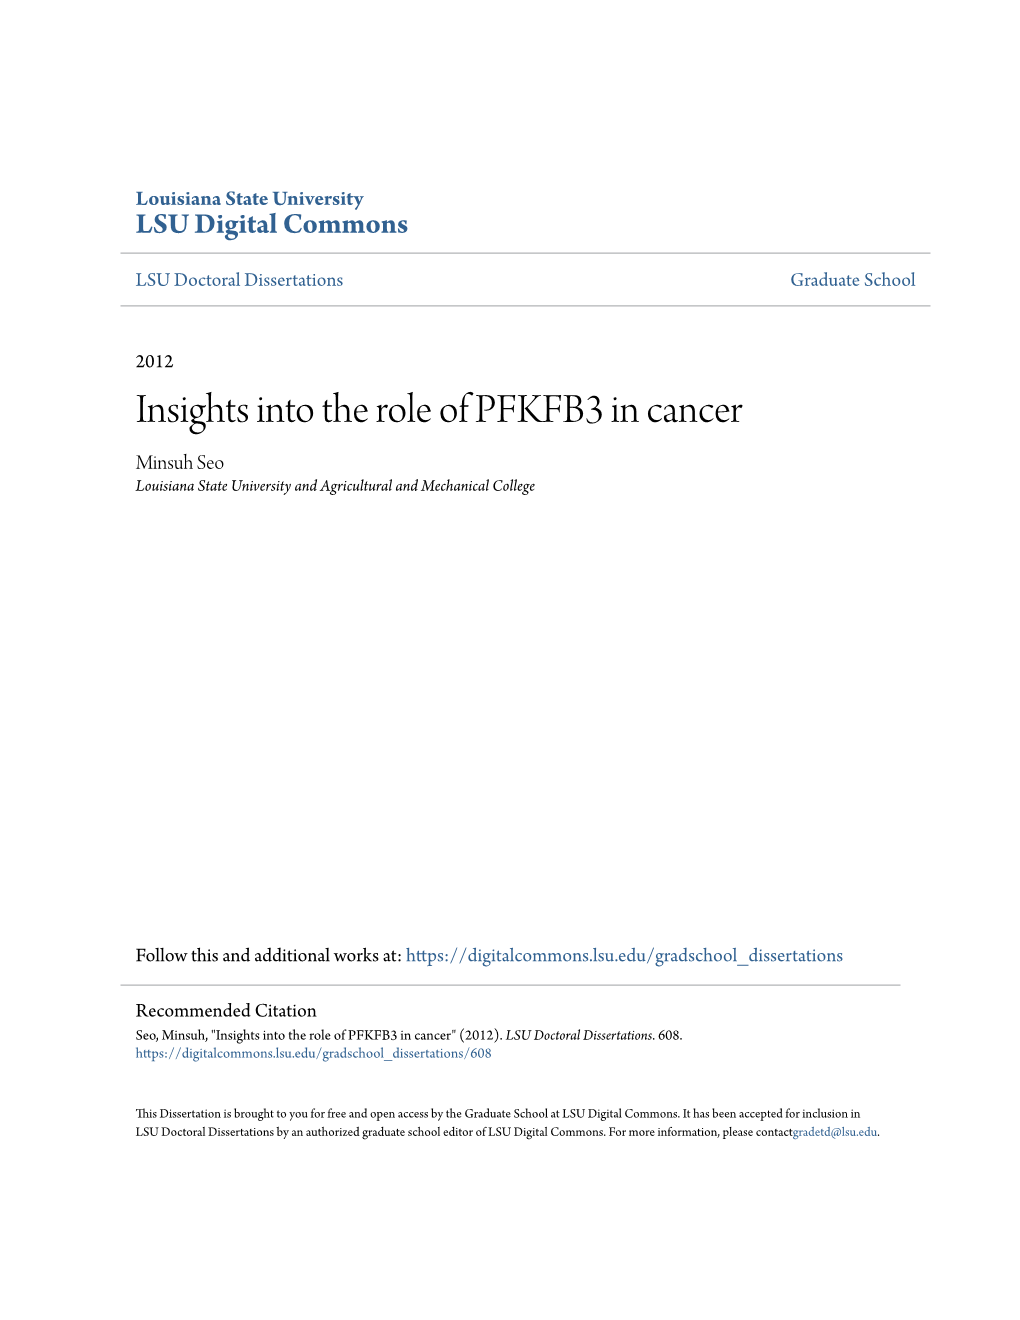 Insights Into the Role of PFKFB3 in Cancer Minsuh Seo Louisiana State University and Agricultural and Mechanical College